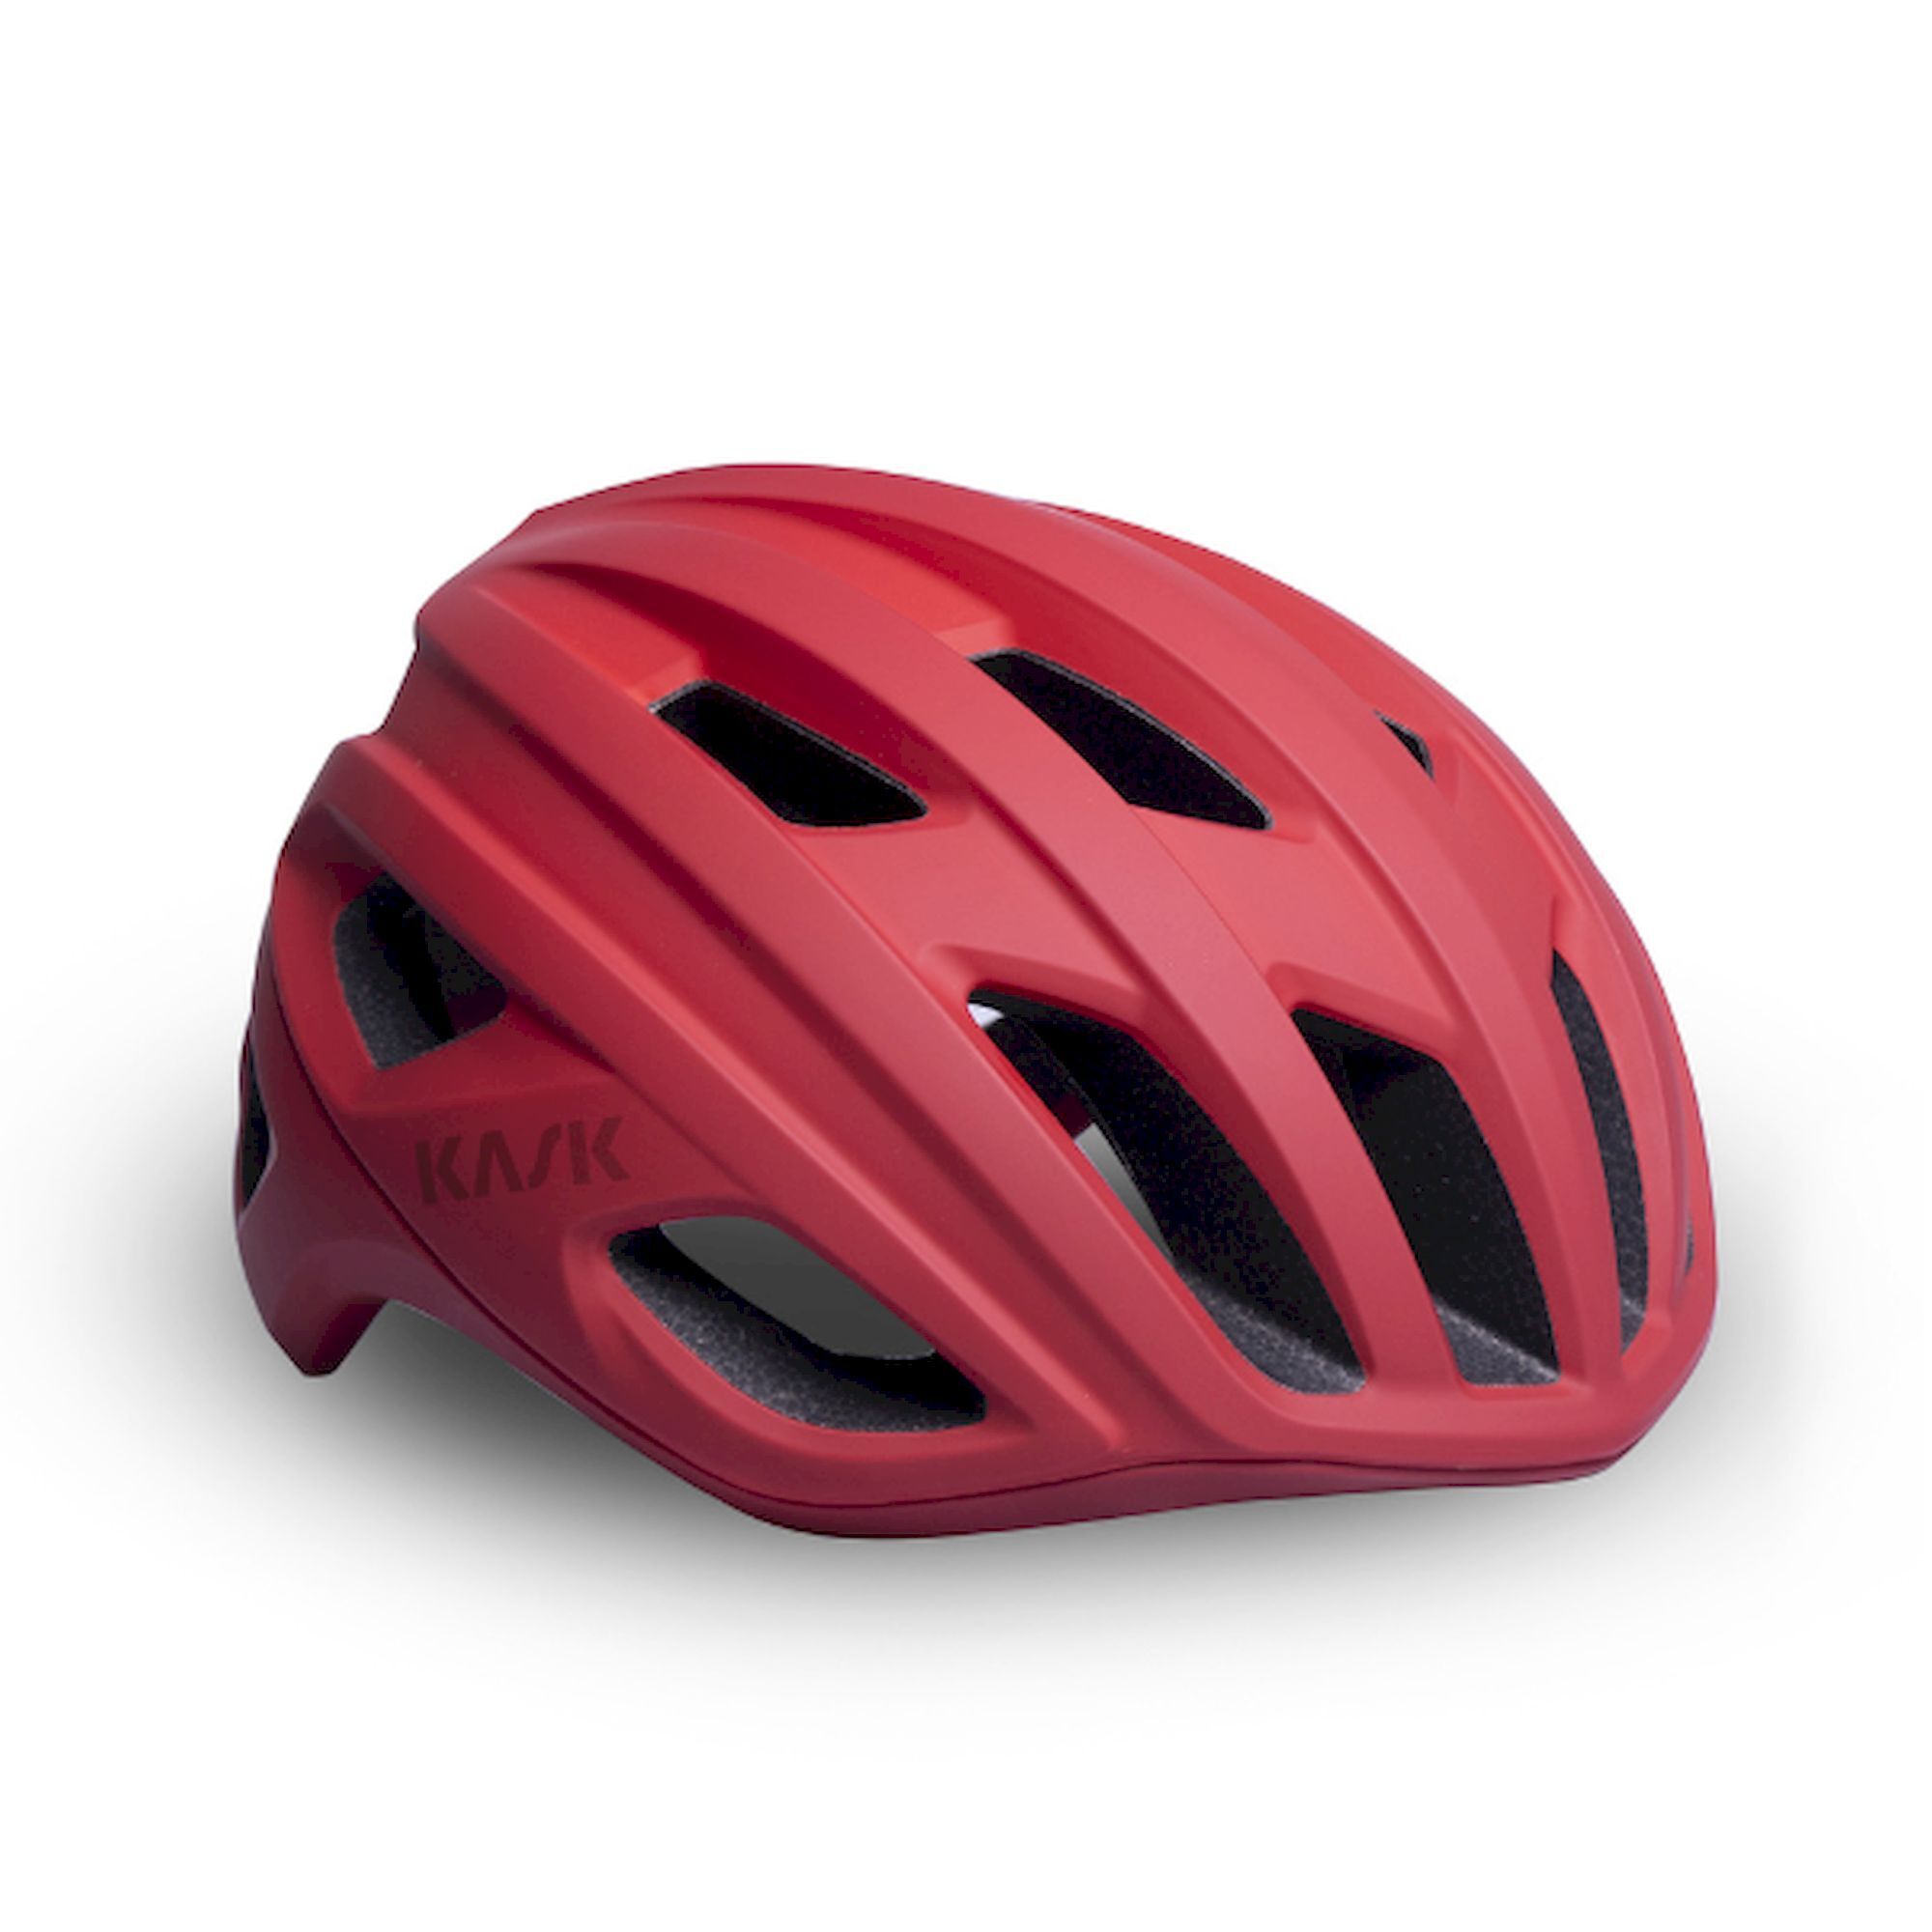 KASK Mojito3 - Casque vélo route | Hardloop